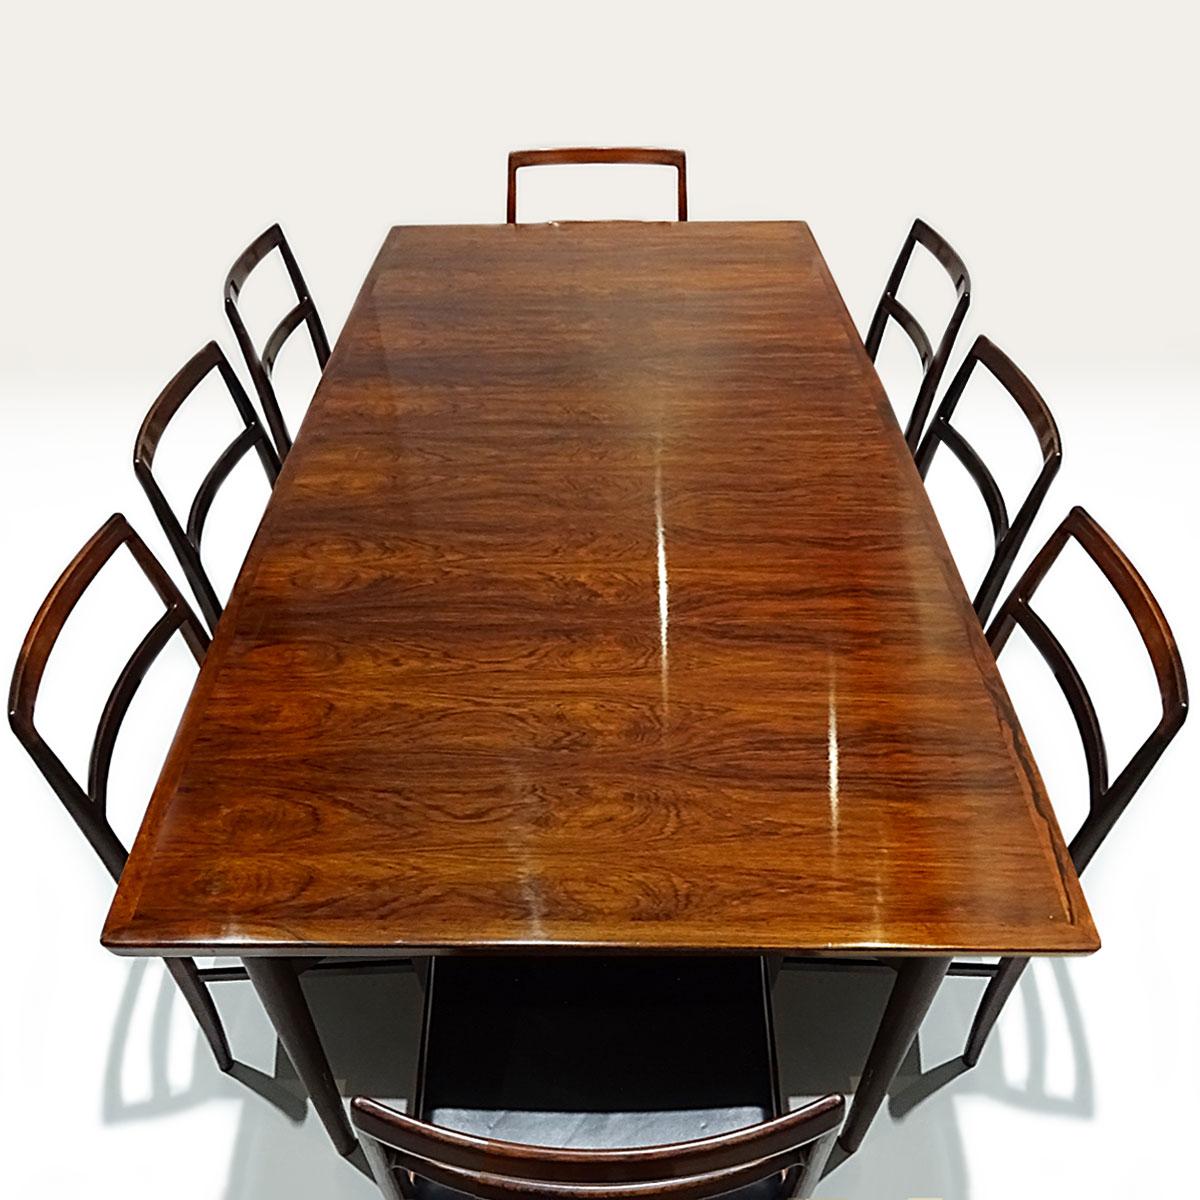 Arne Vodder Danish Midcentury 201 Rosewood Dining Table with Twelve 430 Chairs 2